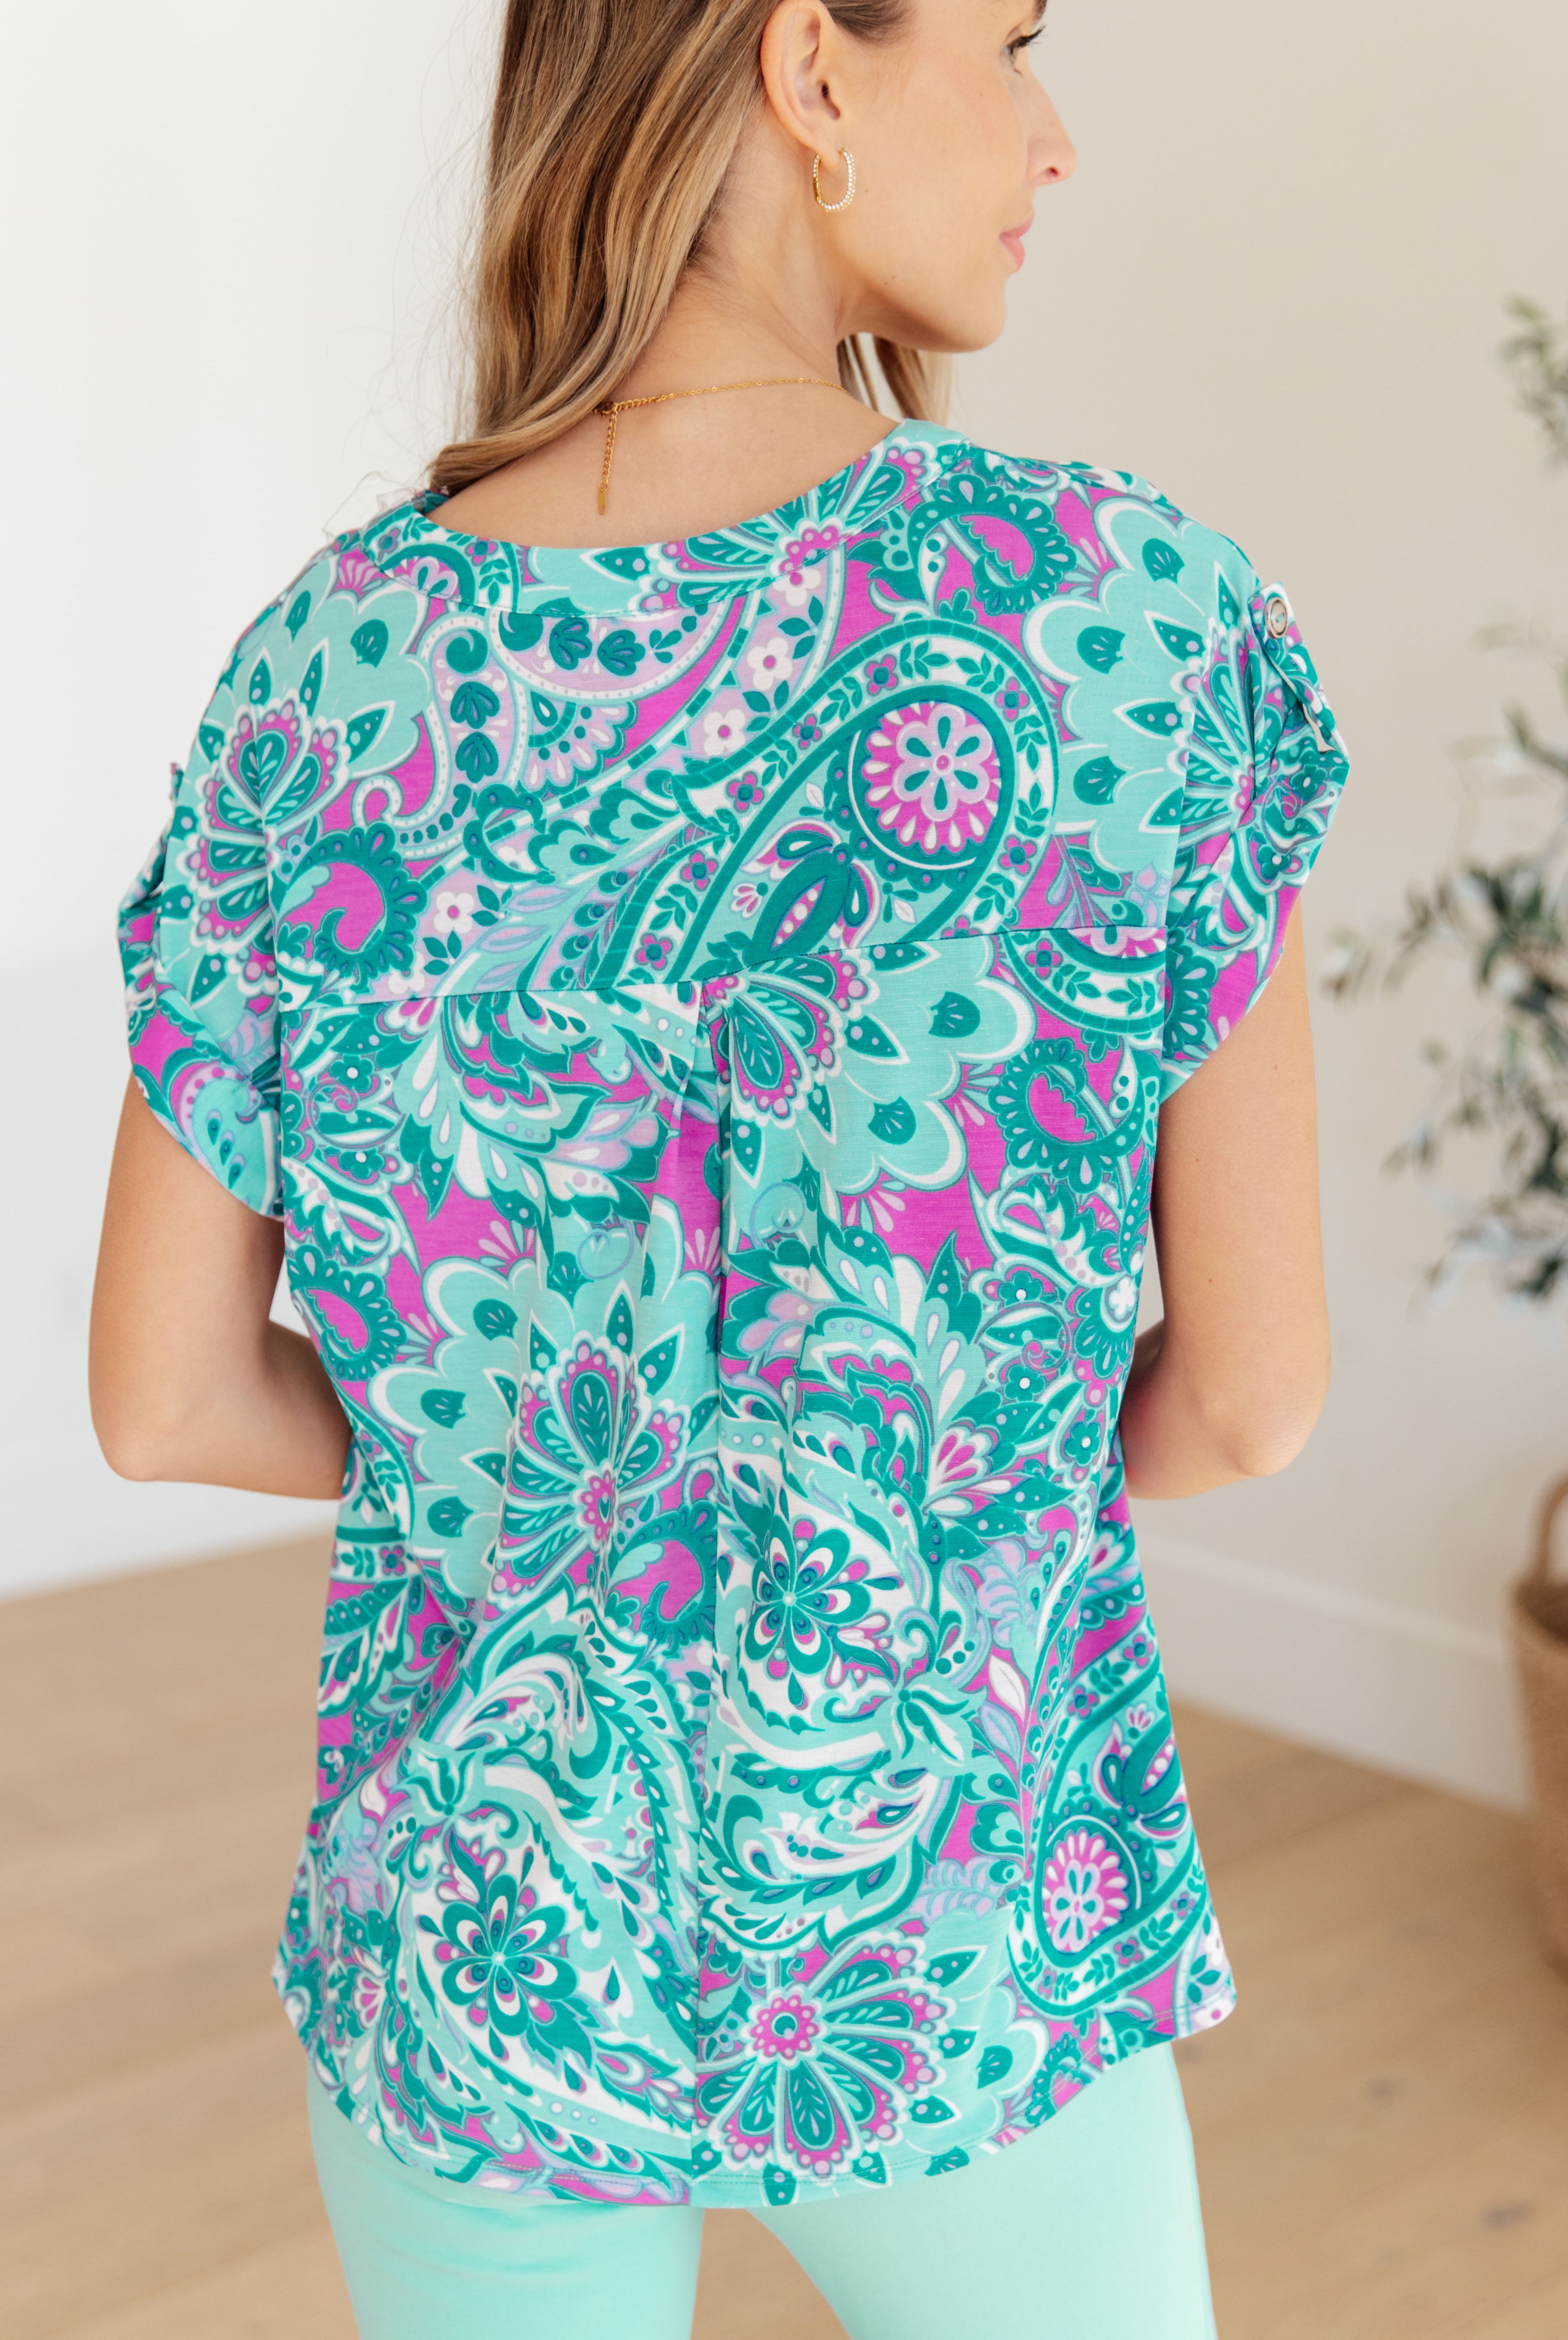 Lizzy Cap Sleeve Top in Magenta and Teal Paisley-Womens-Ave Shops-Urban Threadz Boutique, Women's Fashion Boutique in Saugatuck, MI